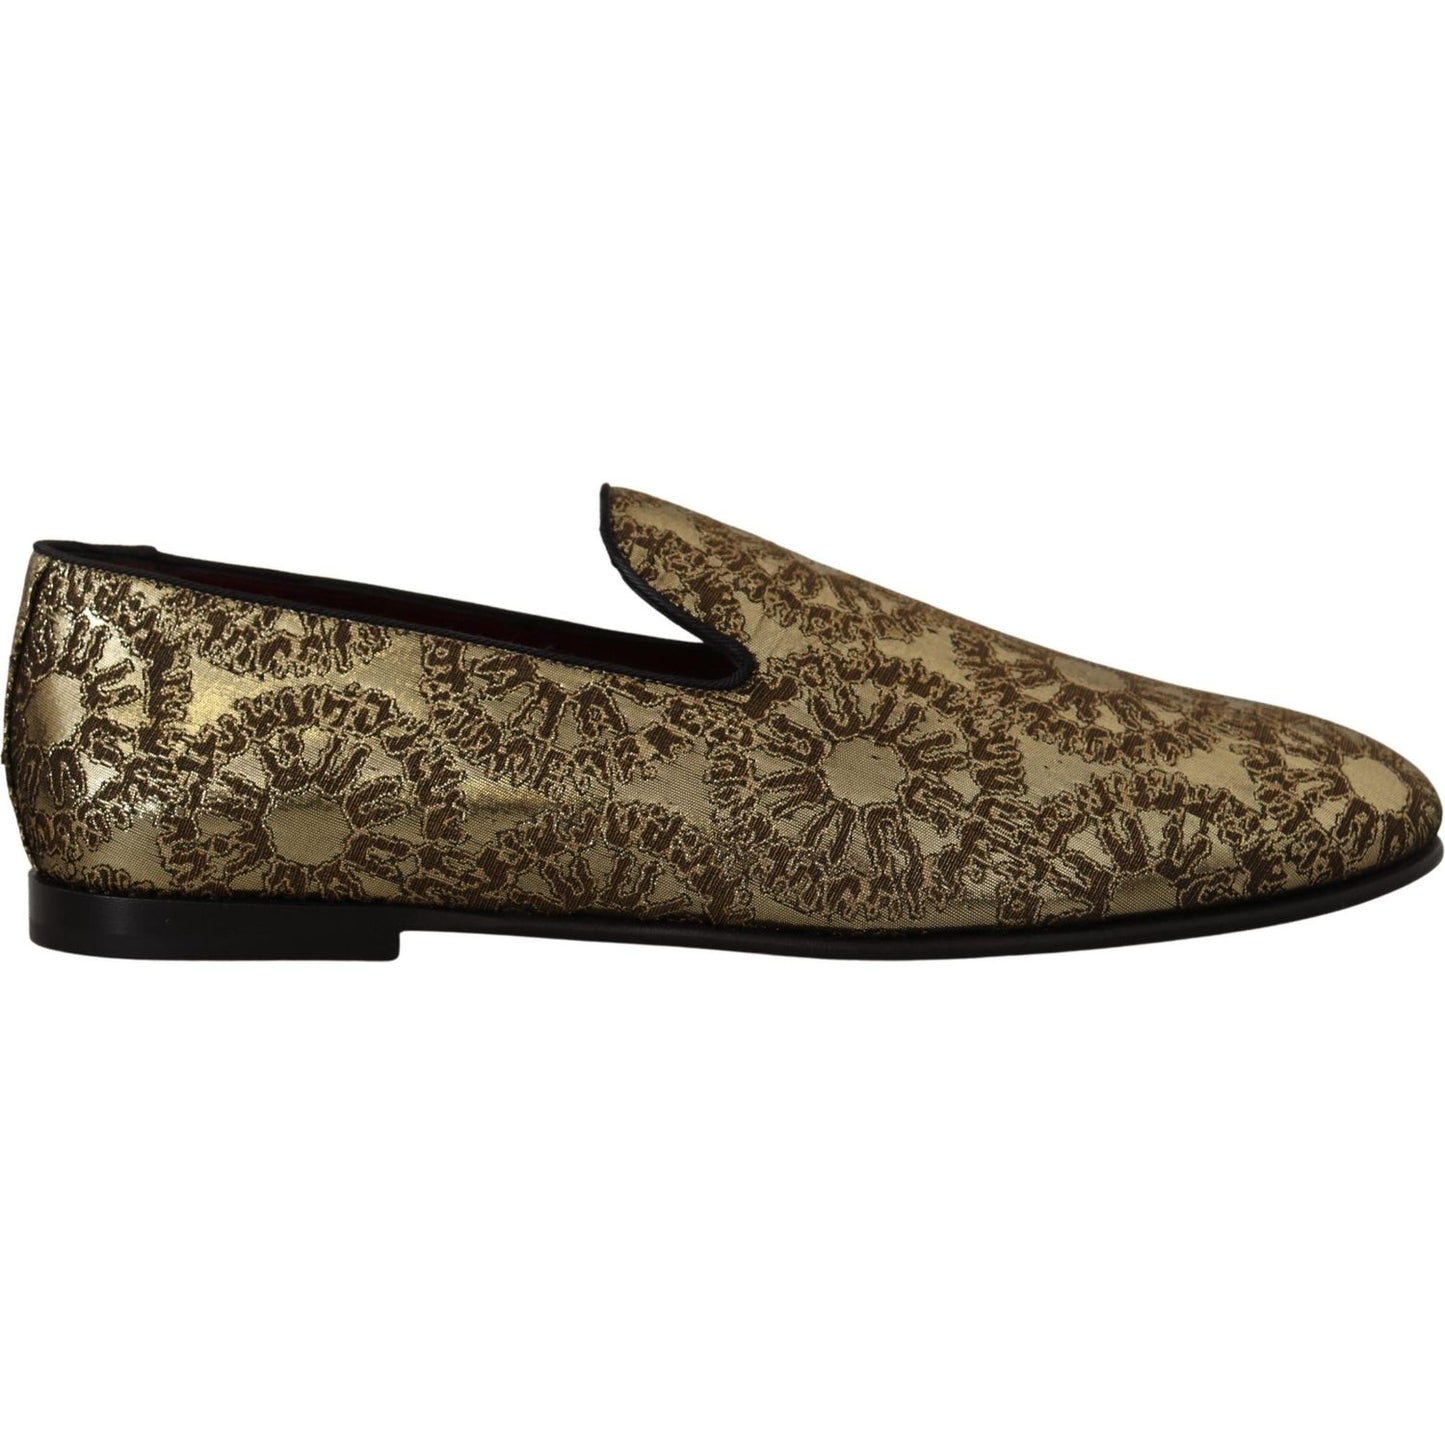 Dolce & Gabbana Gold Tone Loafers Slides Dress Shoes gold-jacquard-flats-mens-loafers-shoes-1 IMG_0879-scaled-0cfd4909-97b.jpg